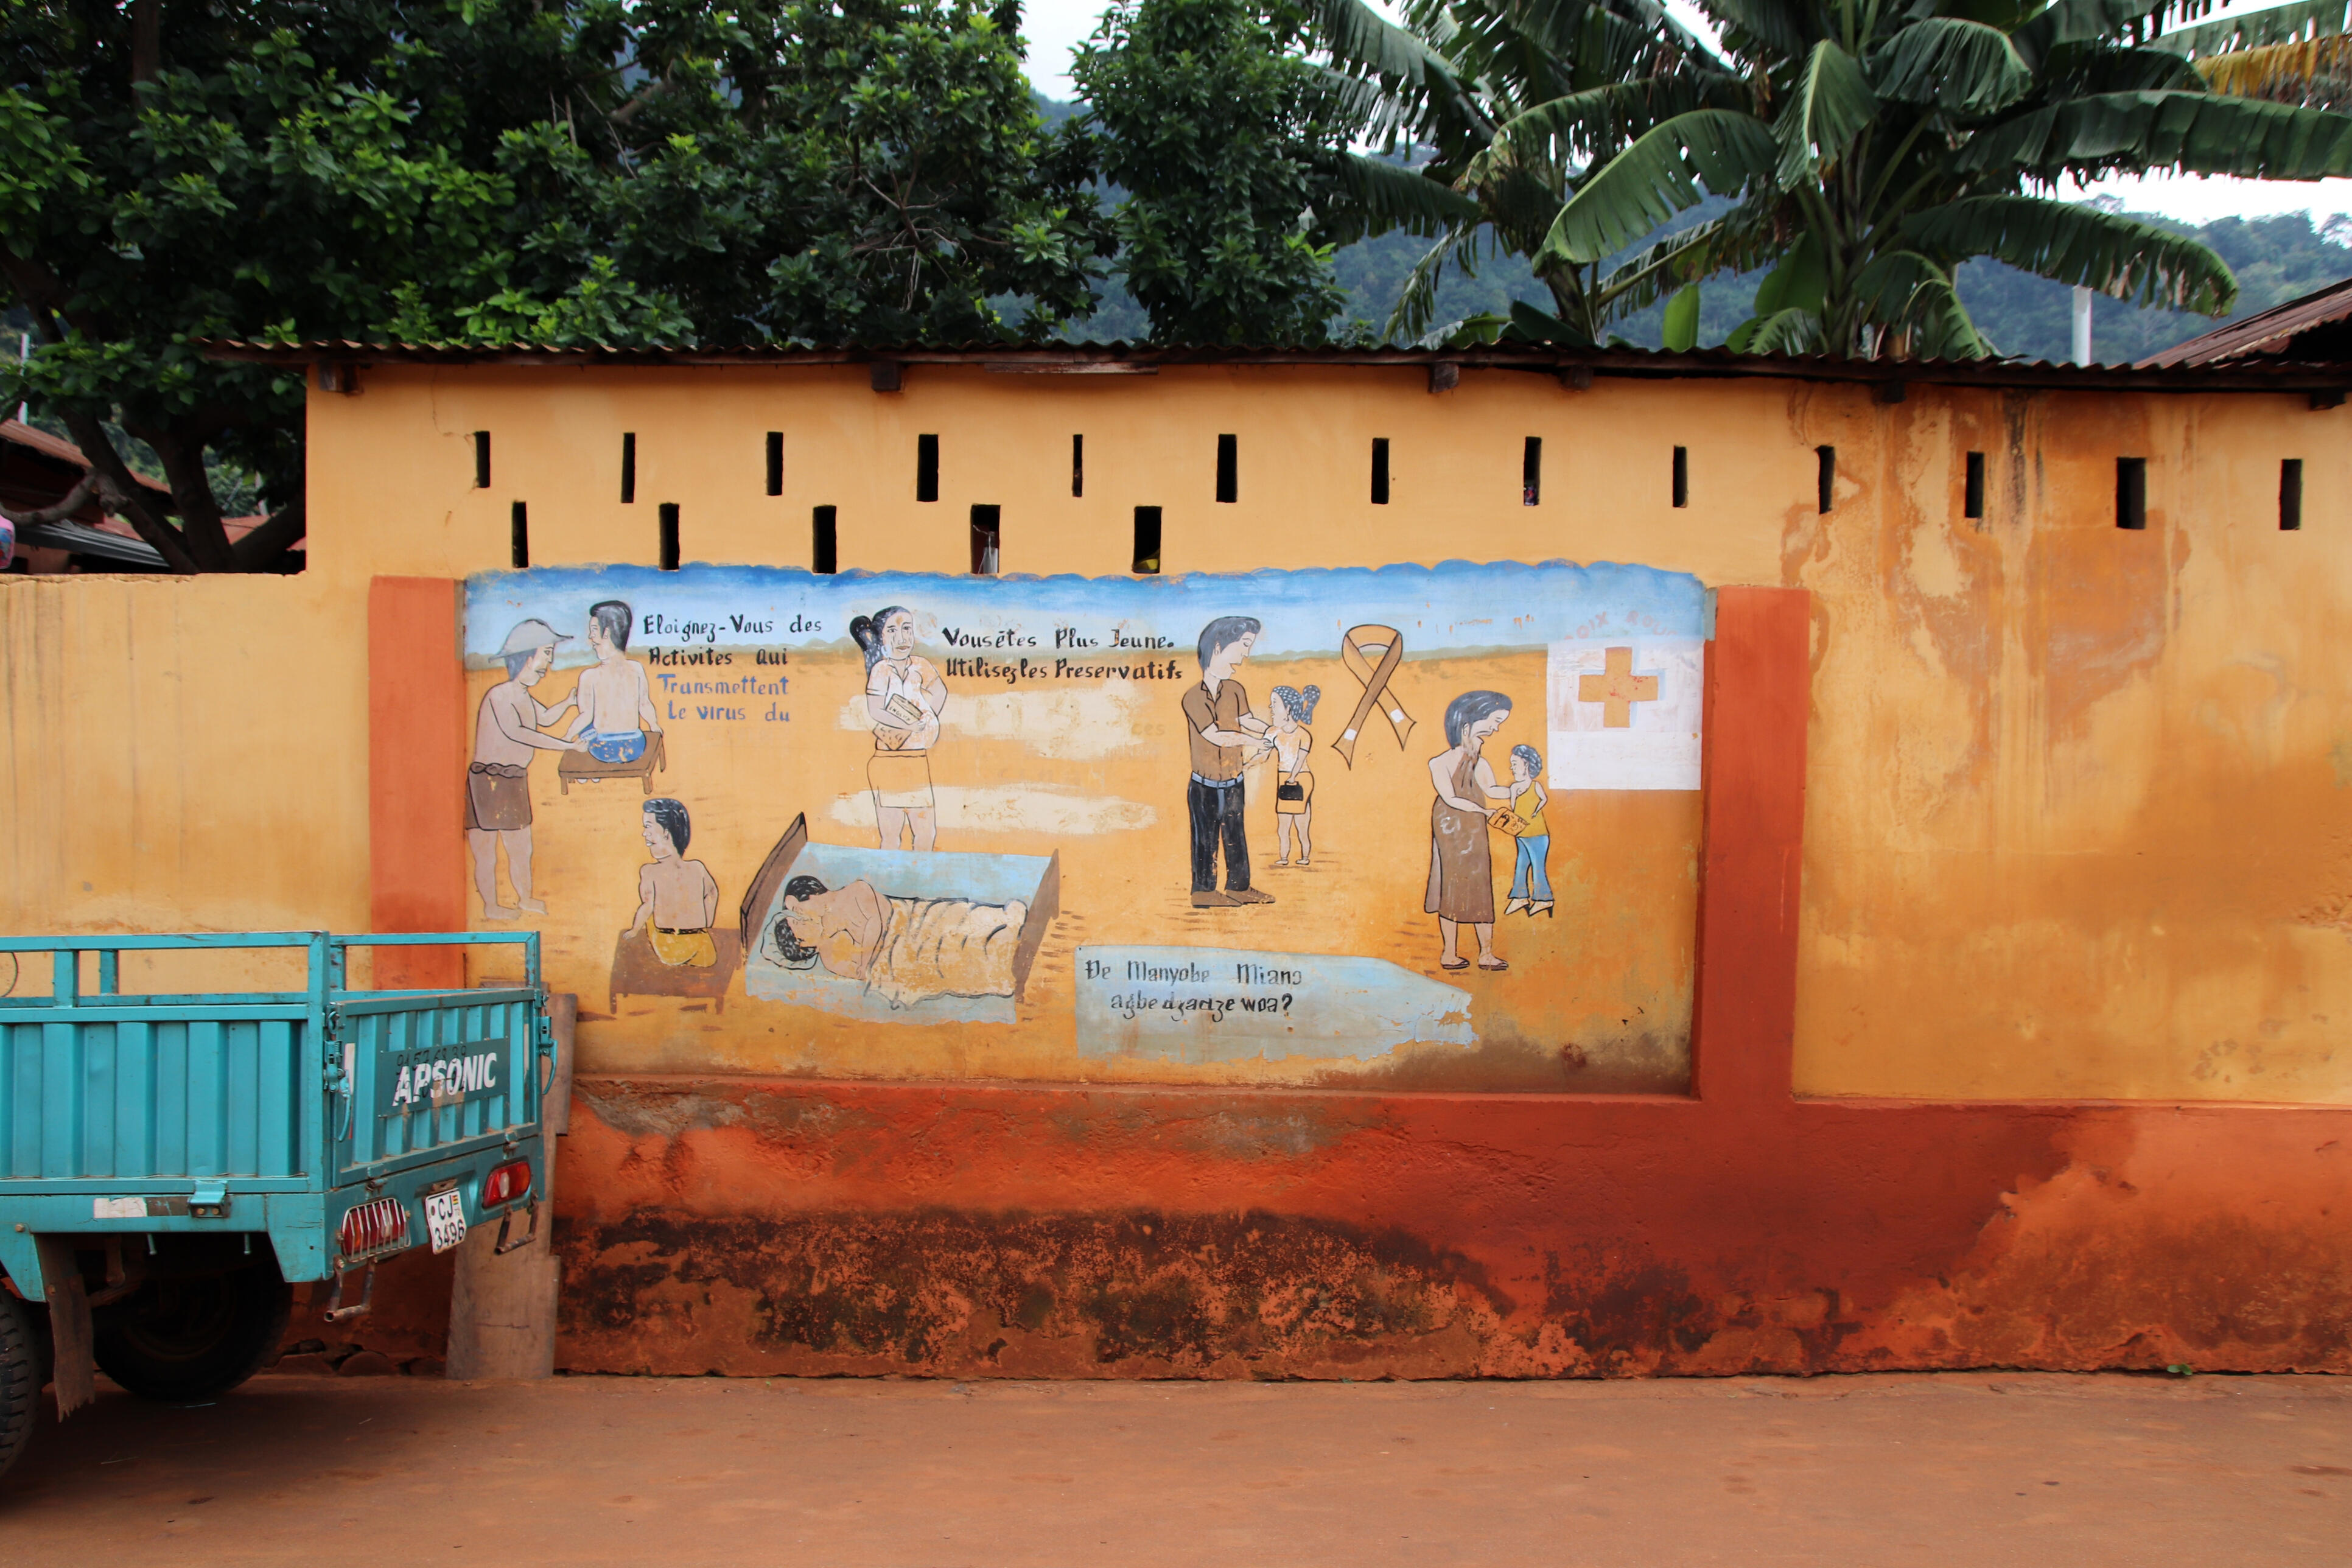 Painted health advice against HIV illness at a wall on a side road between Lomé and Kpalimé near Assahoun in Togo, West Africa.